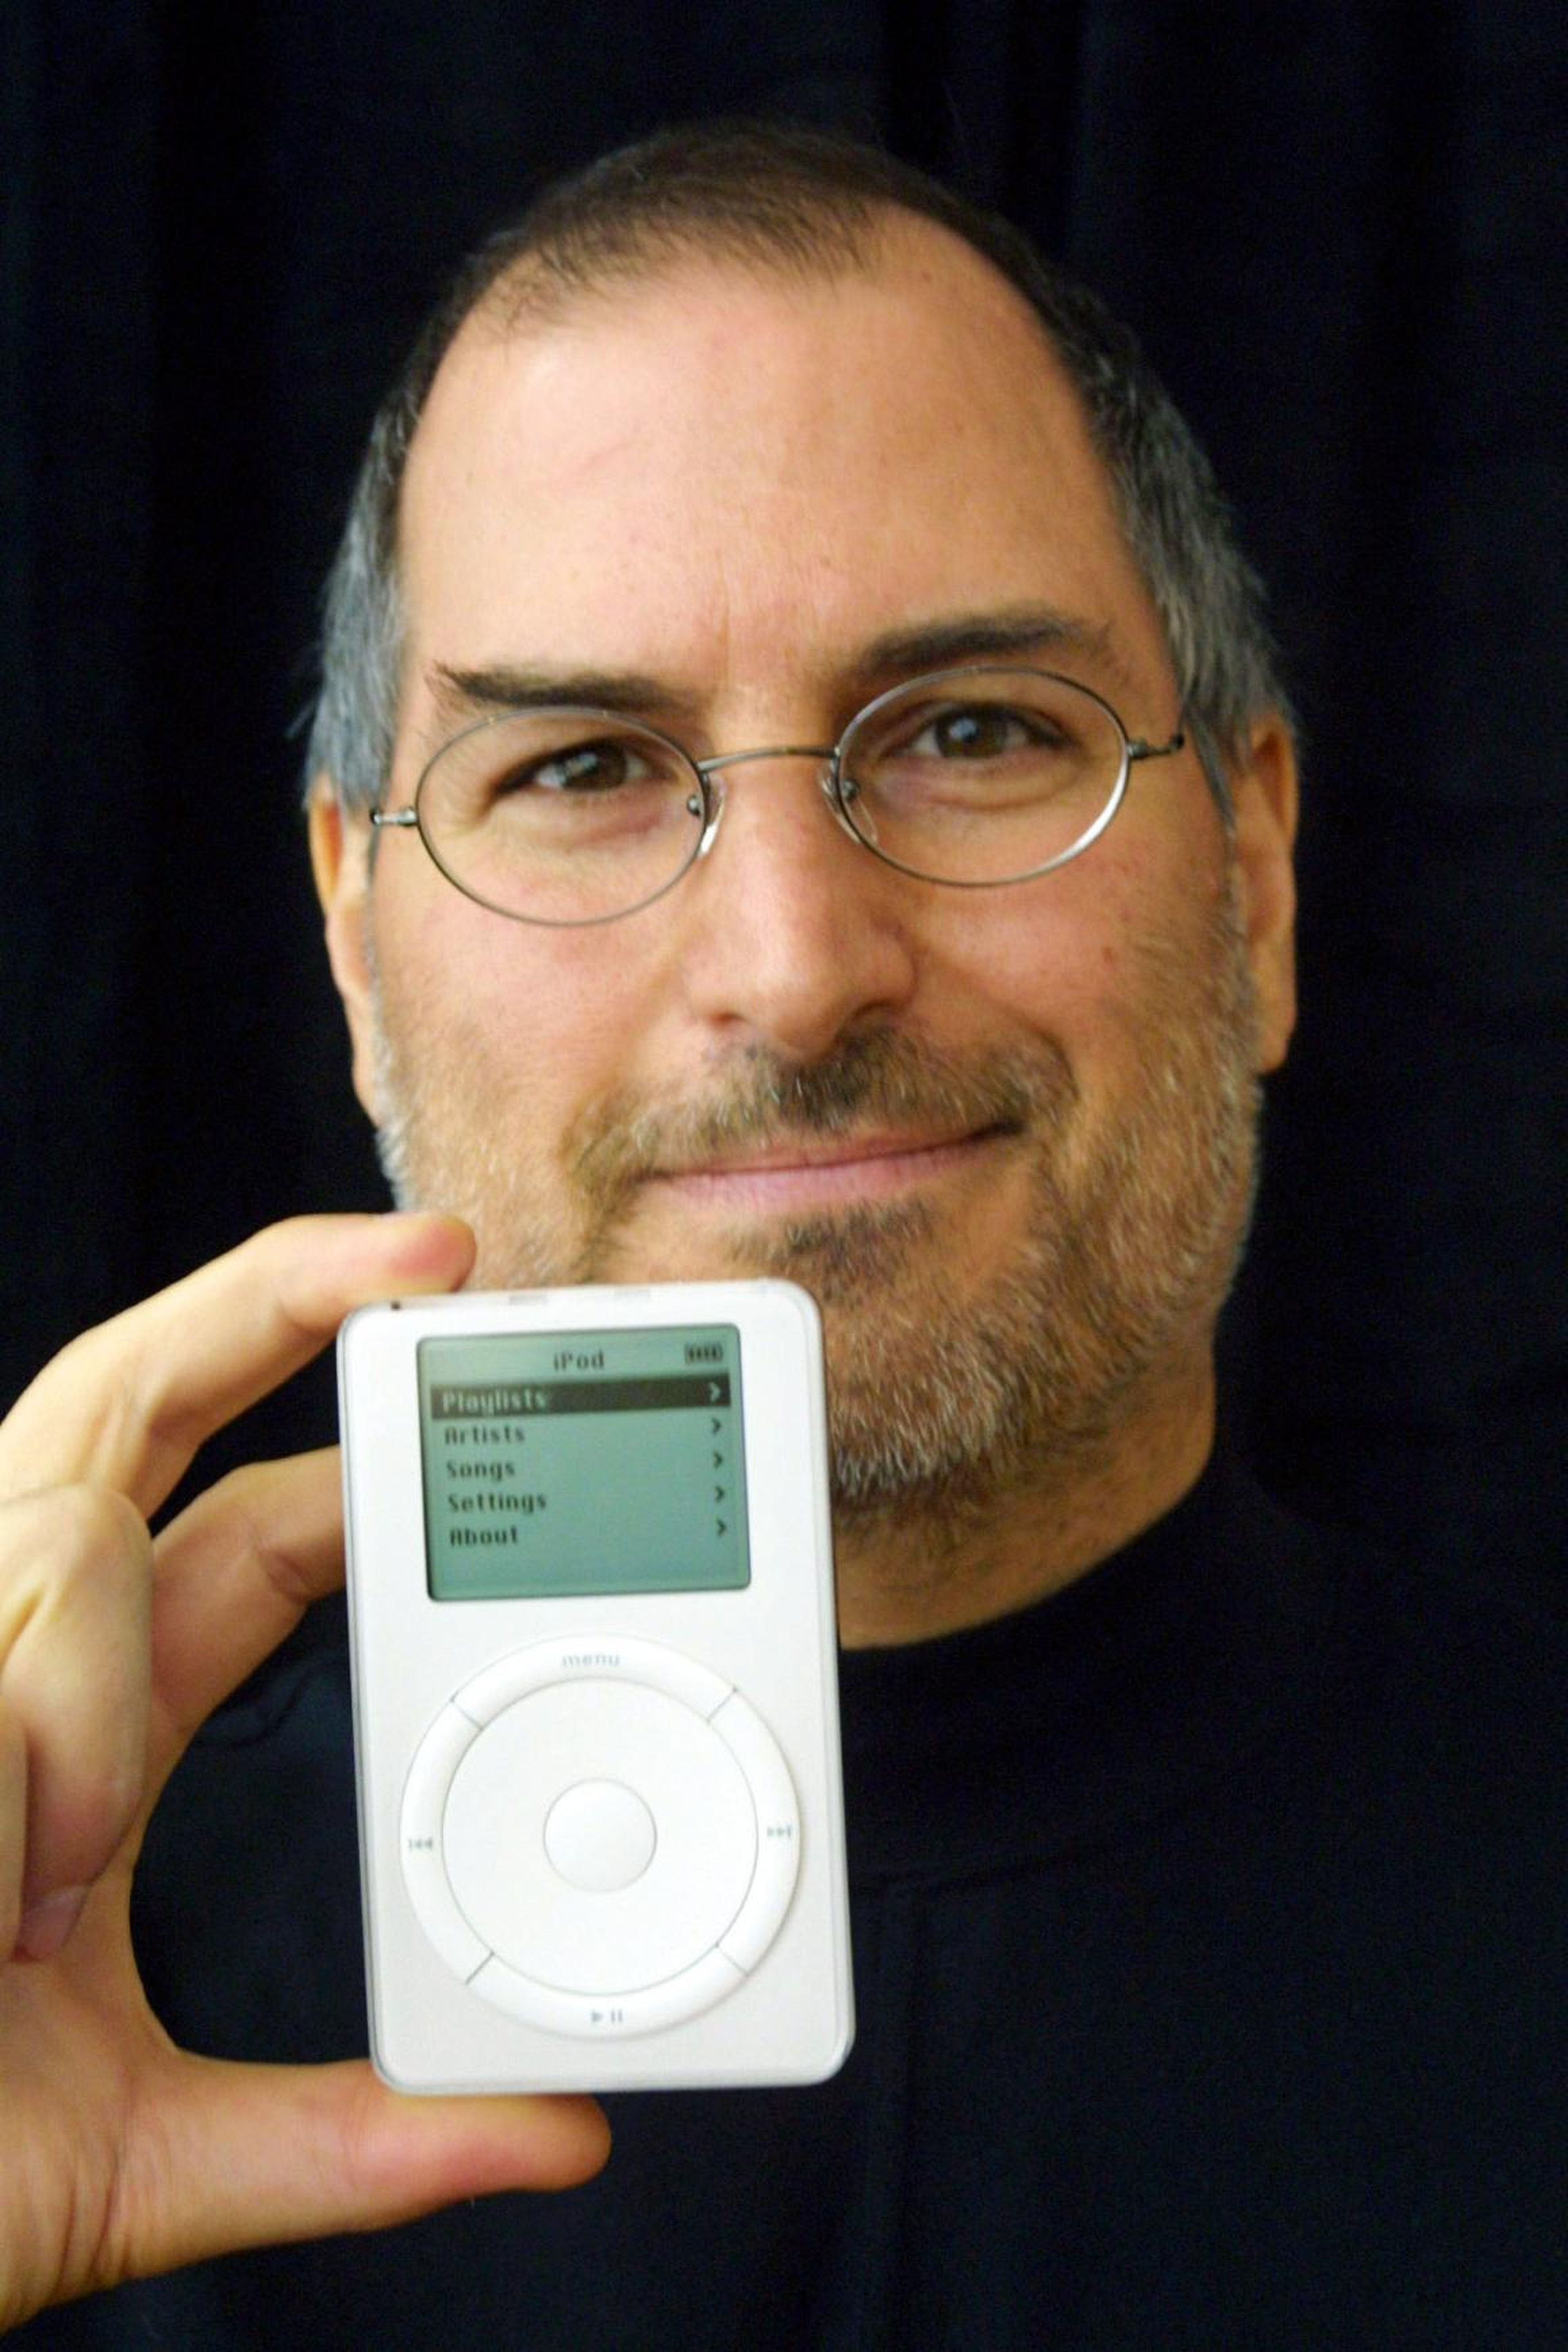 In October, Jobs' Apple would take its first steps beyond the Mac with the iPod, a digital music player that promised "1,000 songs in your pocket." The iPod actually got off to a slow start, largely because it started at a pricey